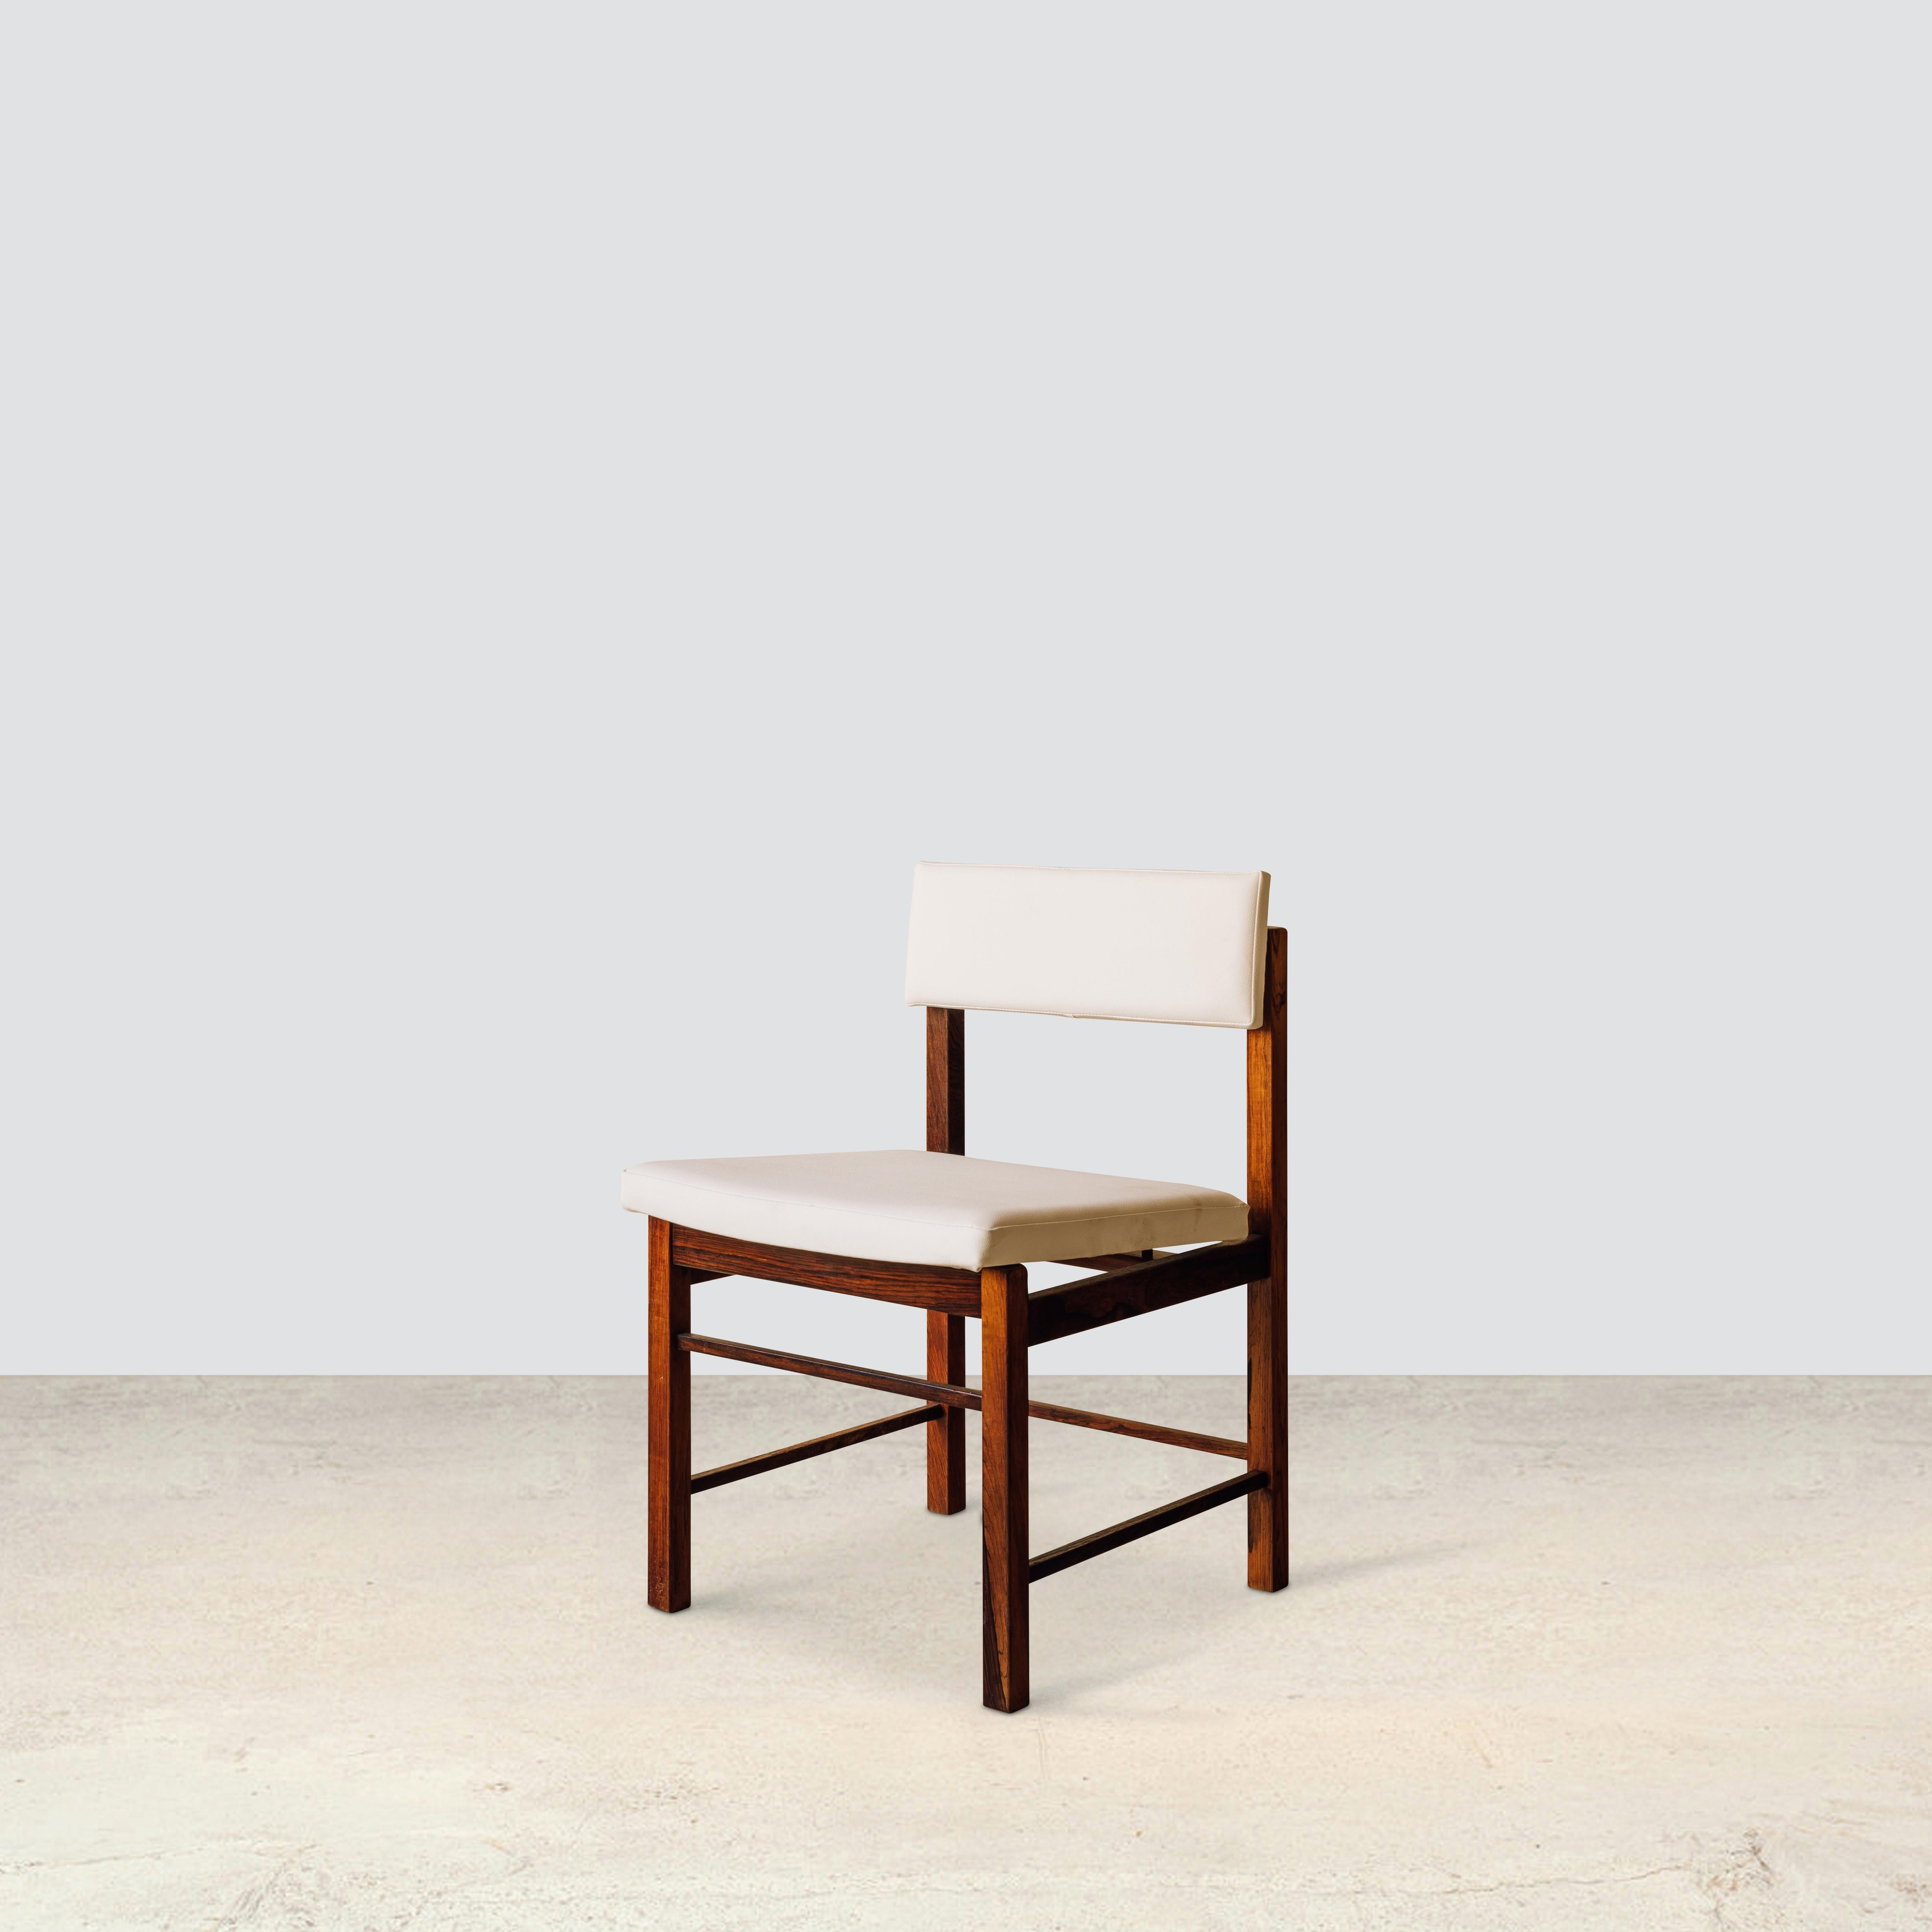 Tiao dining chair
By Sergio Rodrigues 1959

The 